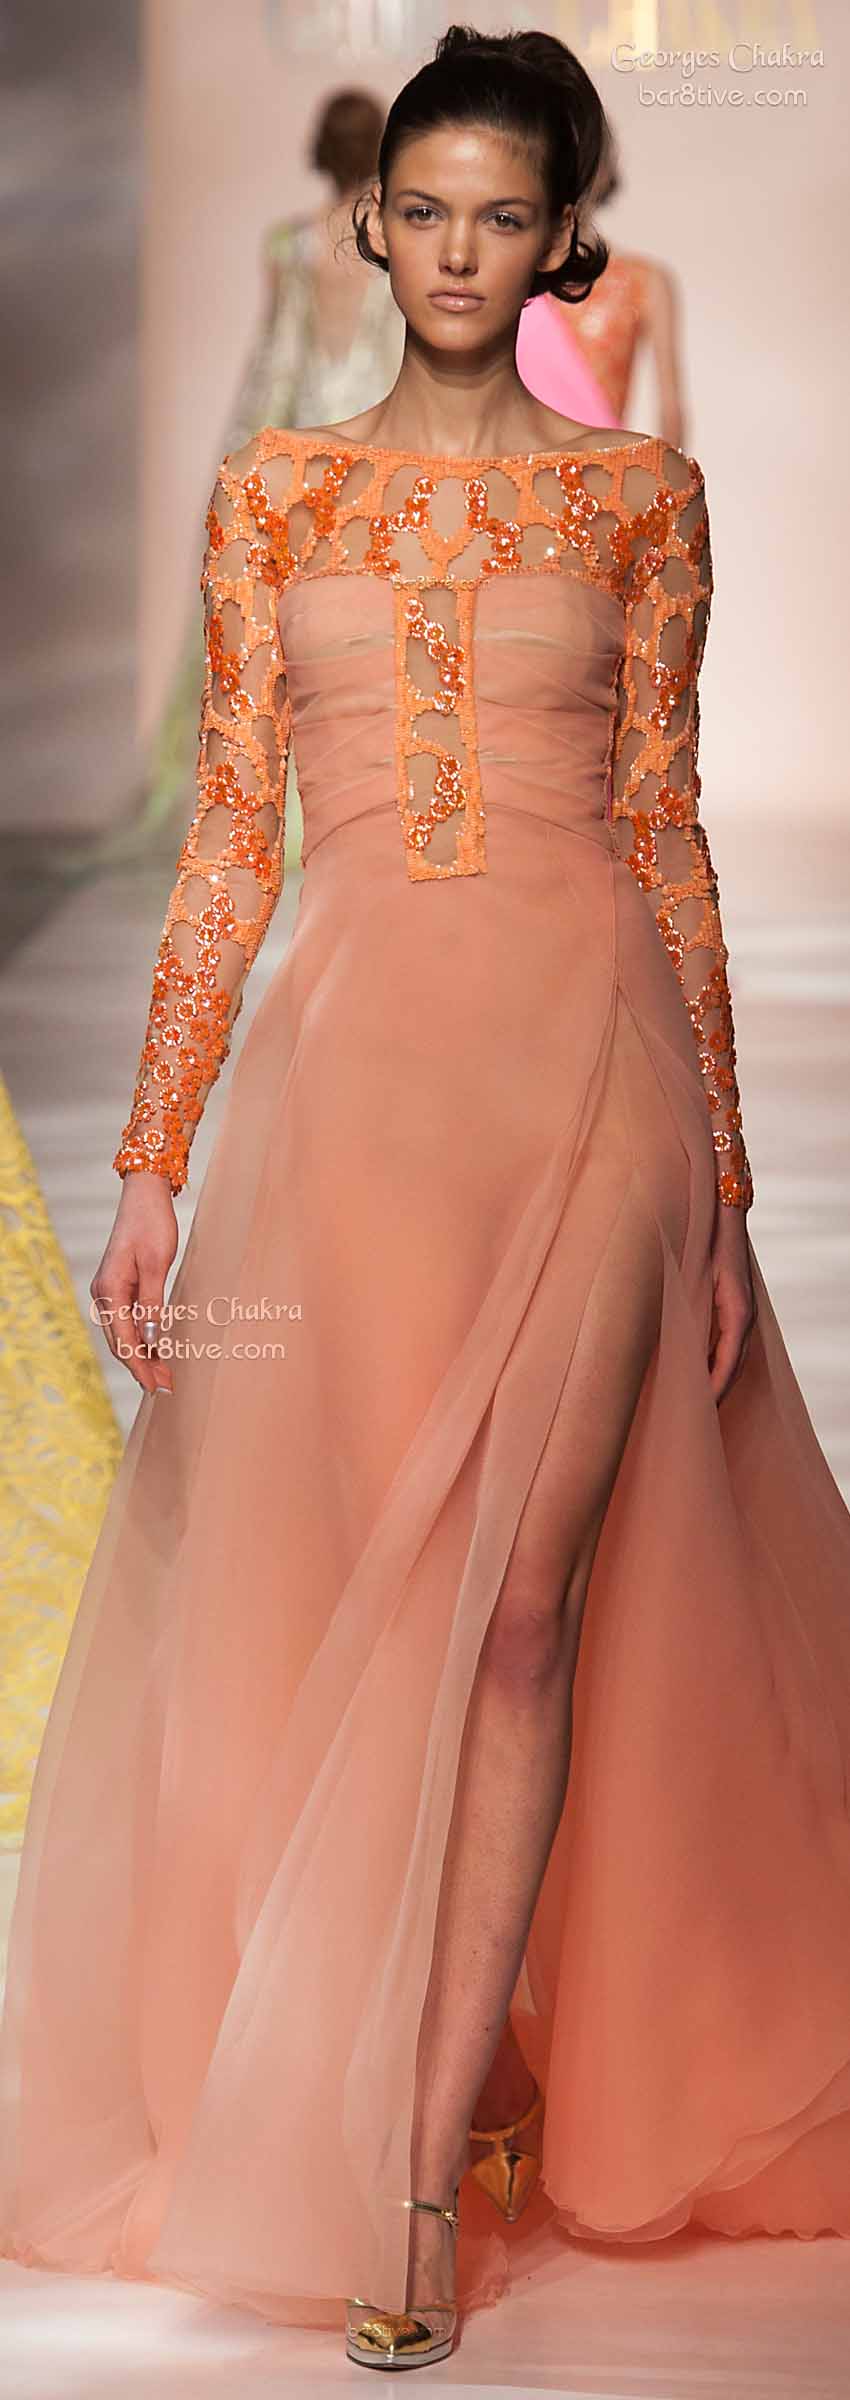 Georges Chakra Spring 2015